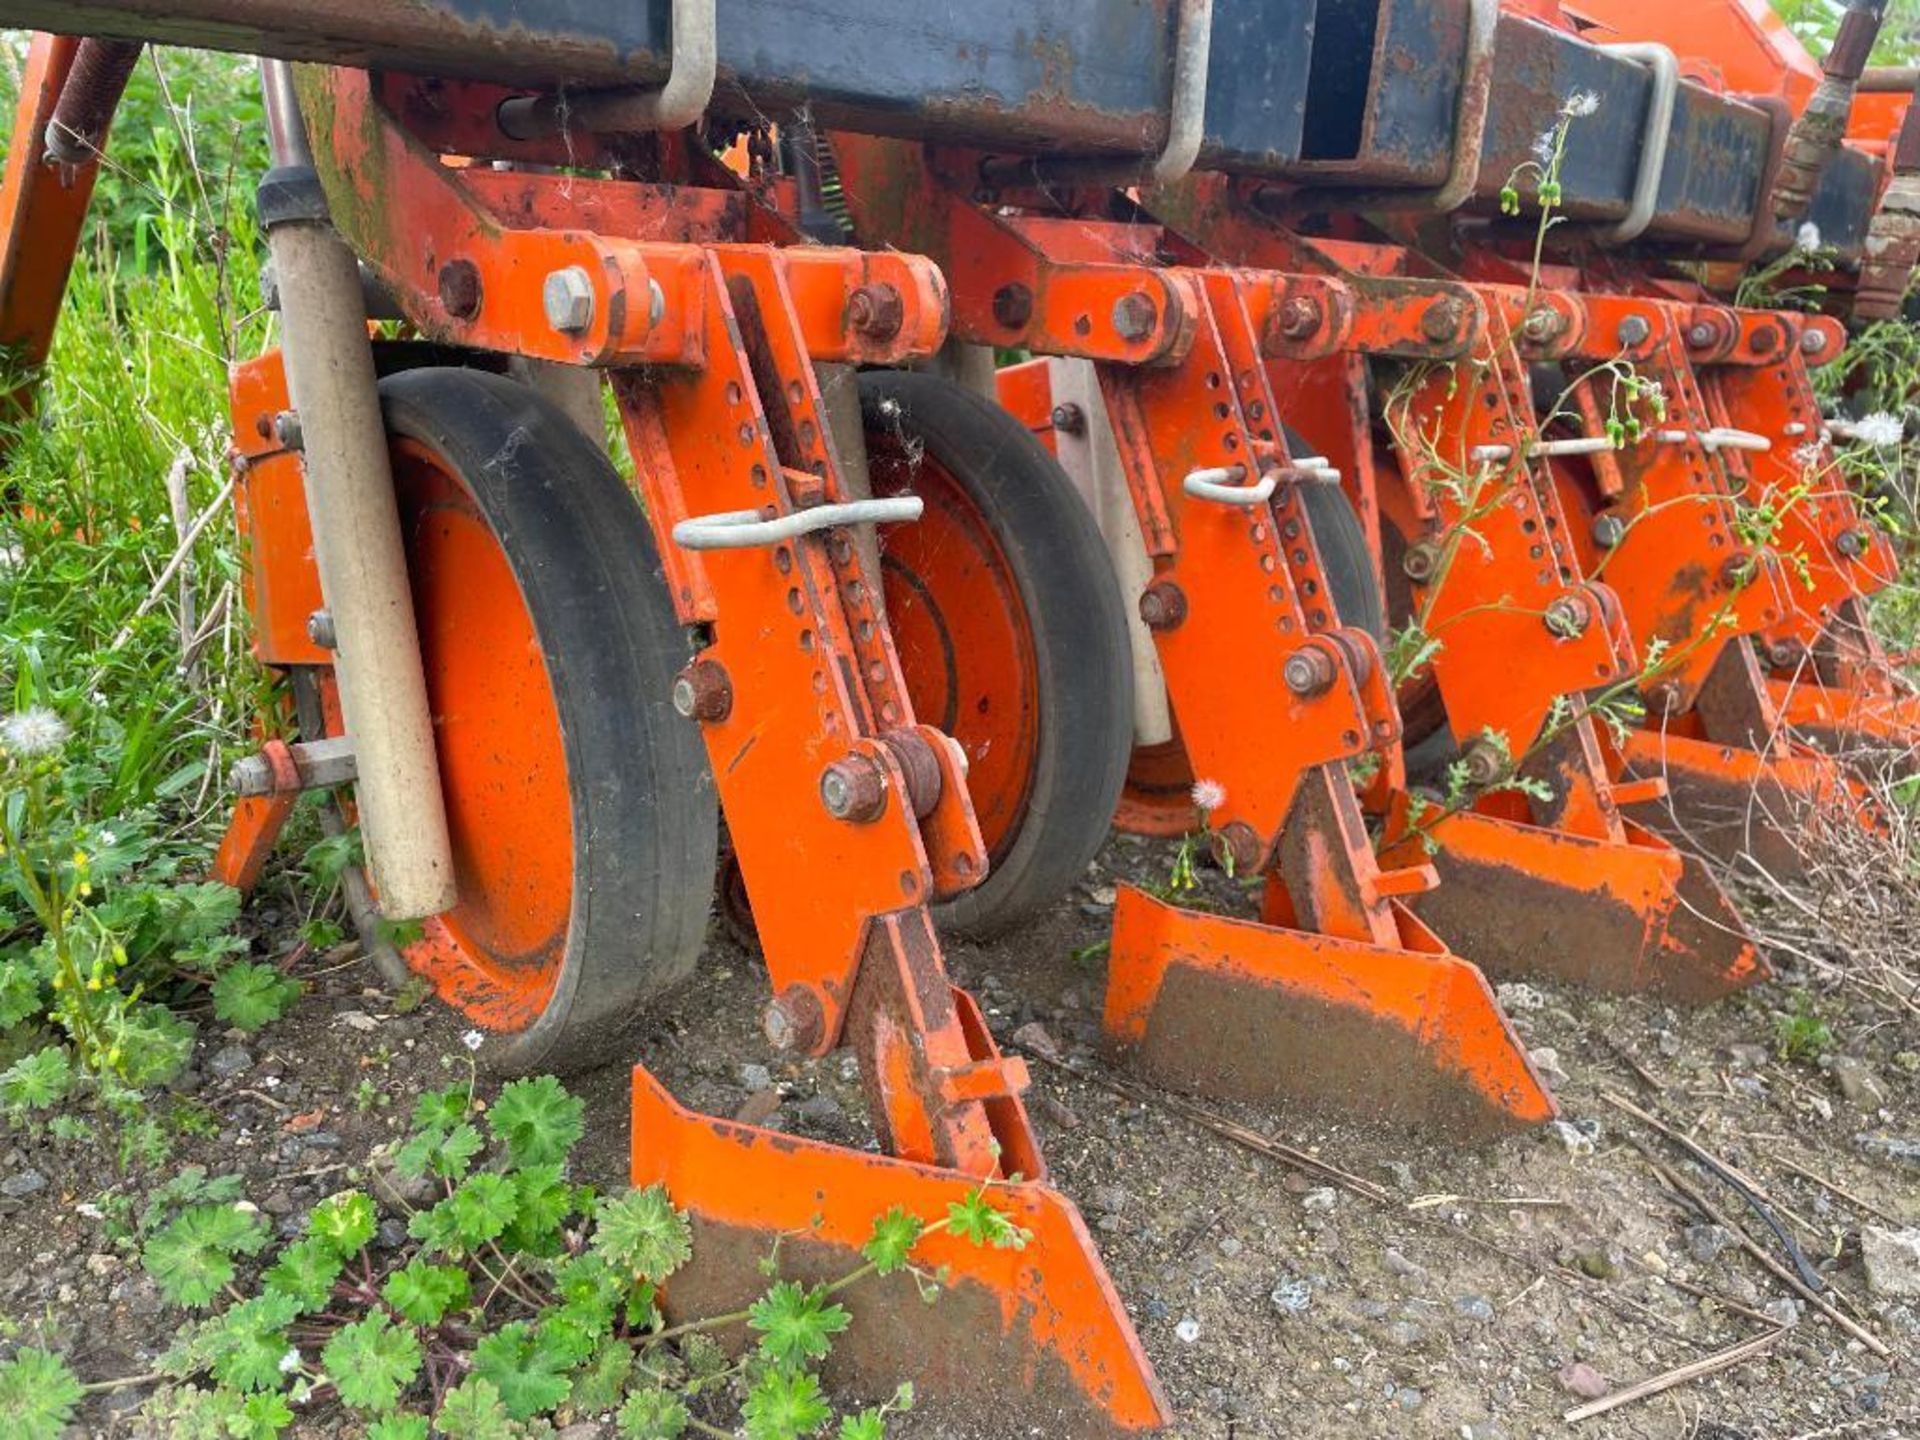 Stanhay Rallye 3bed/15row onion drill hydraulic folding, linkage mounted - Image 6 of 6